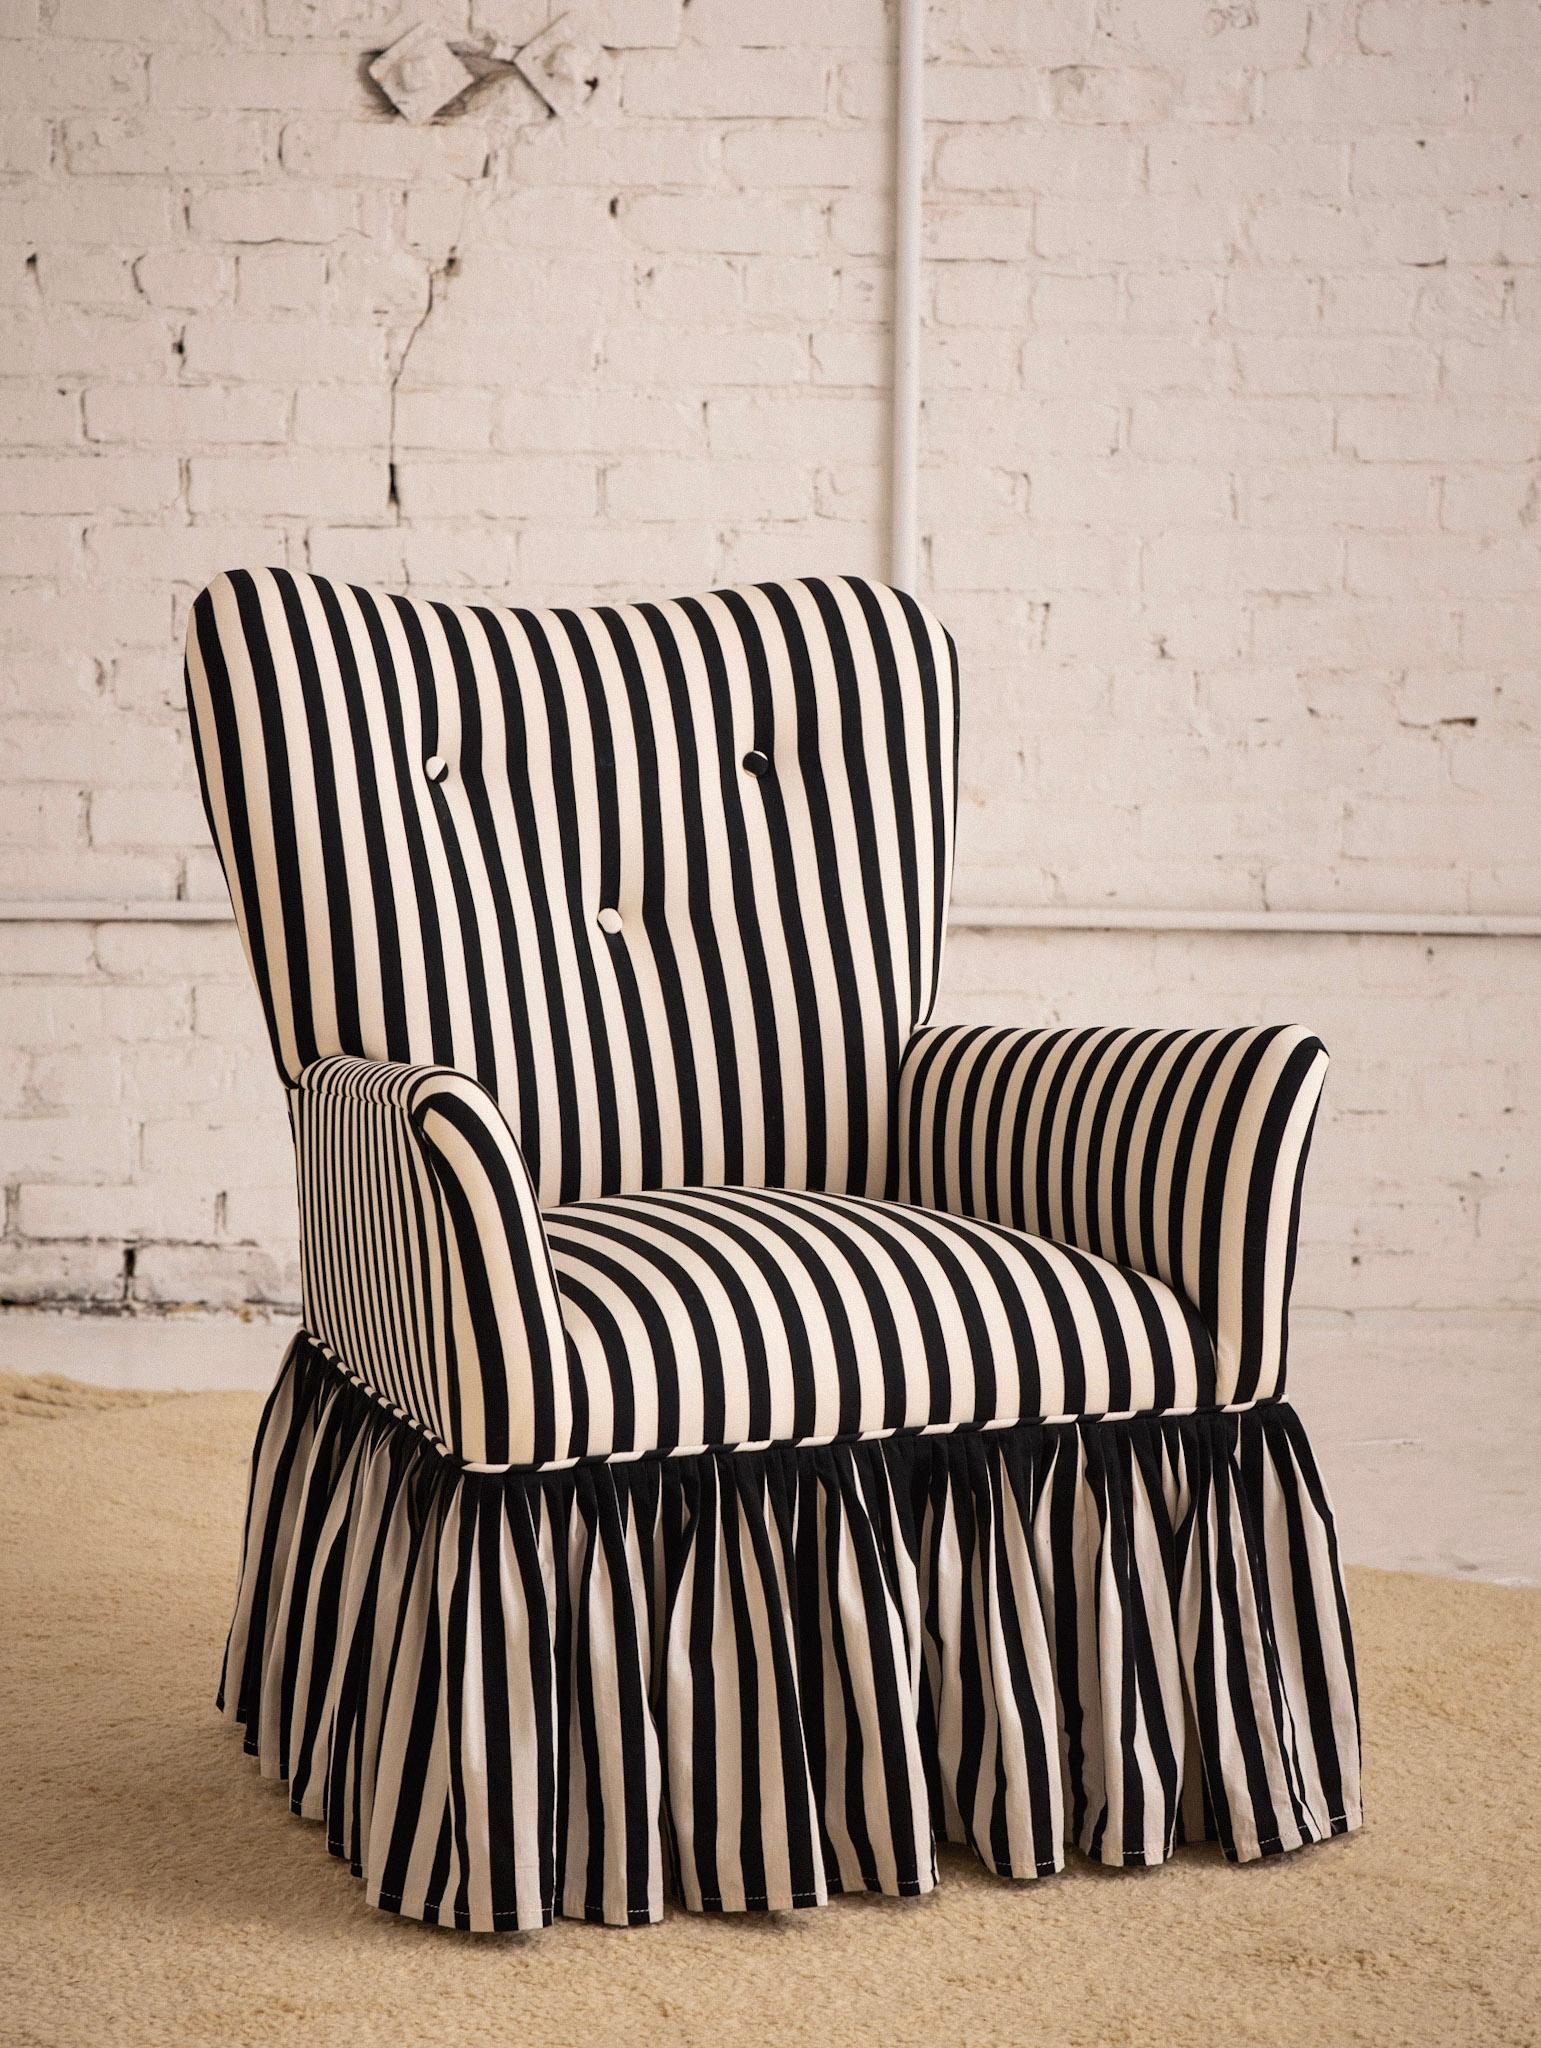 A Mid Century side chair with ruffled skirt. Newly reupholstered in a vintage 1960’s dead stock black and white striped cotton fabric. Heart shaped back silhouette.